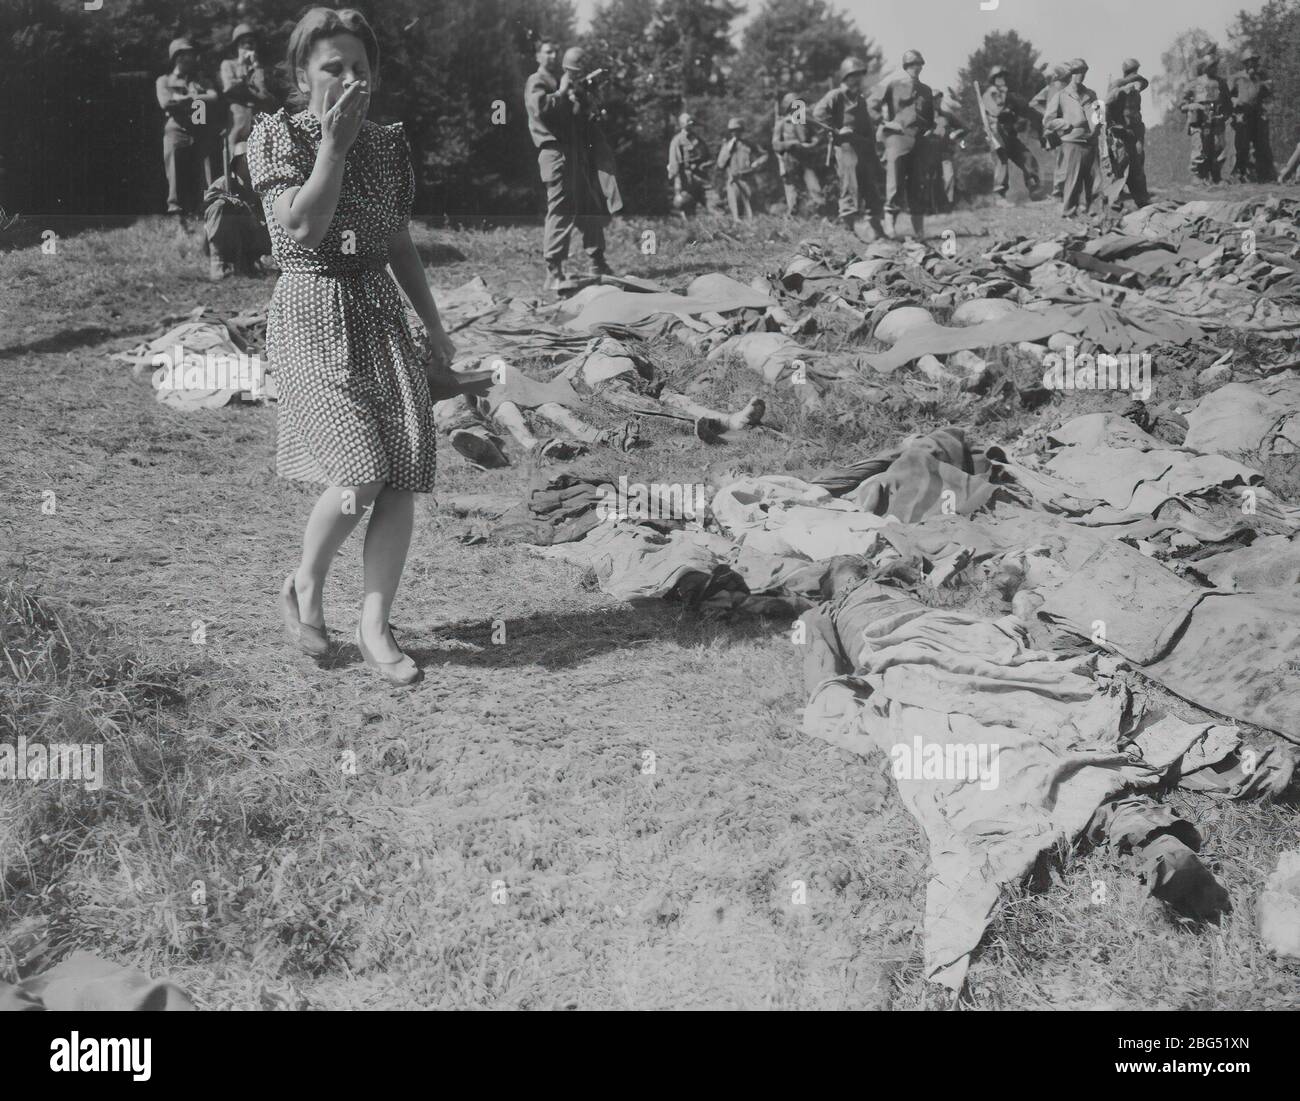 Second World War documentary. Second World War documentary. A young German woman reacts with horror as she walks by some of the approximately 800 prisoners murdered by SS guards near Namering, Germany, and laid there so that townspeople could view the work of their Nazi leaders, May 1945 Stock Photo